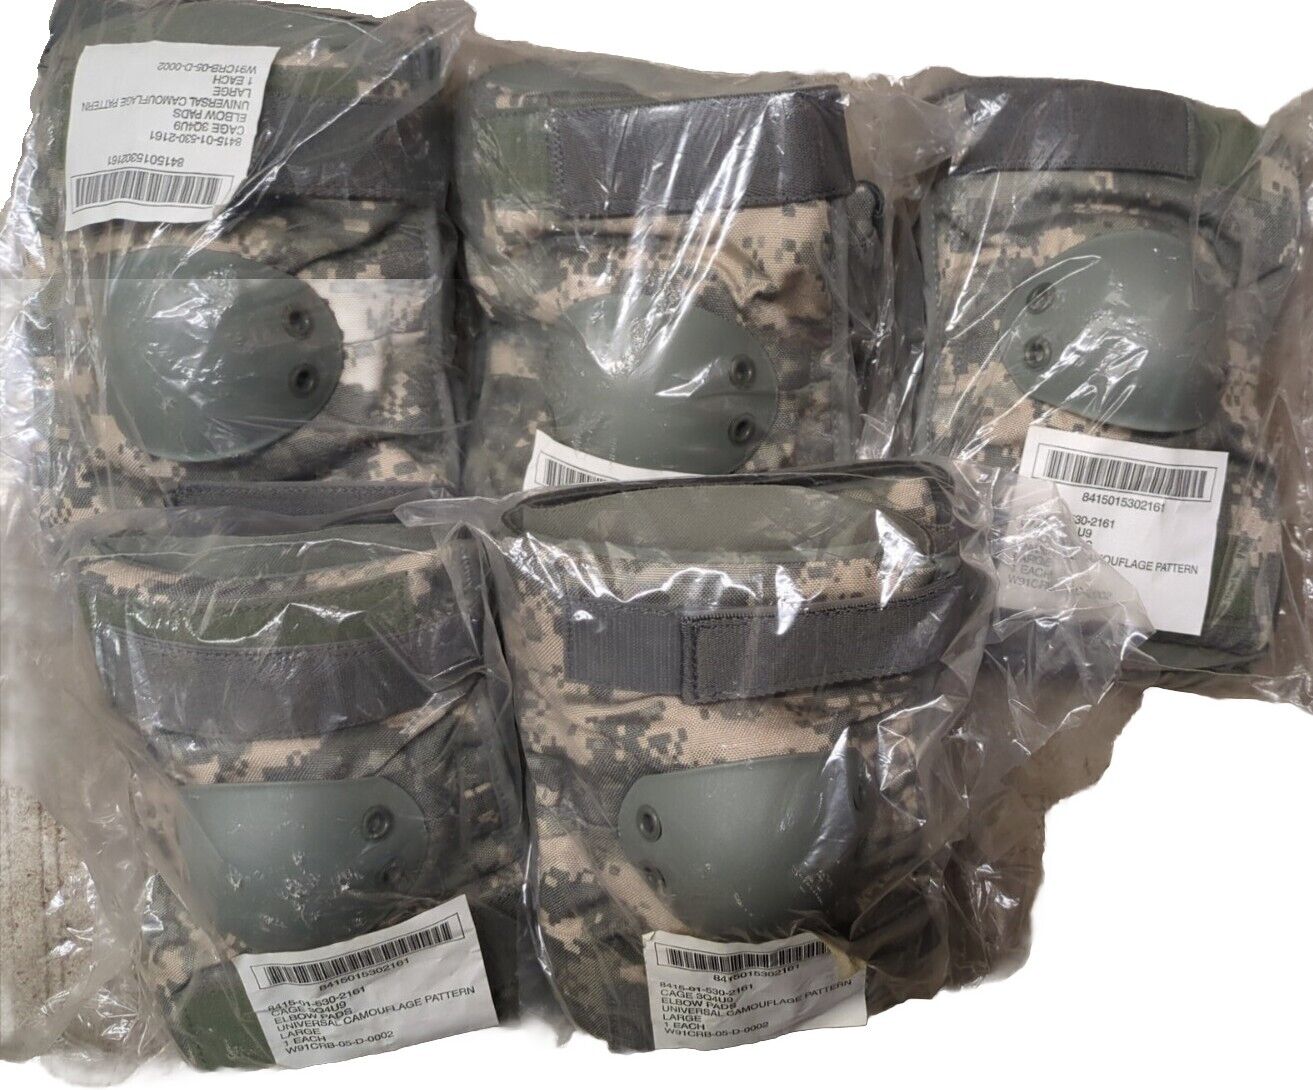 5 Pairs Large Elbow Pads MILITARY Universal Camouflage Pattern 8415-01-530-2161